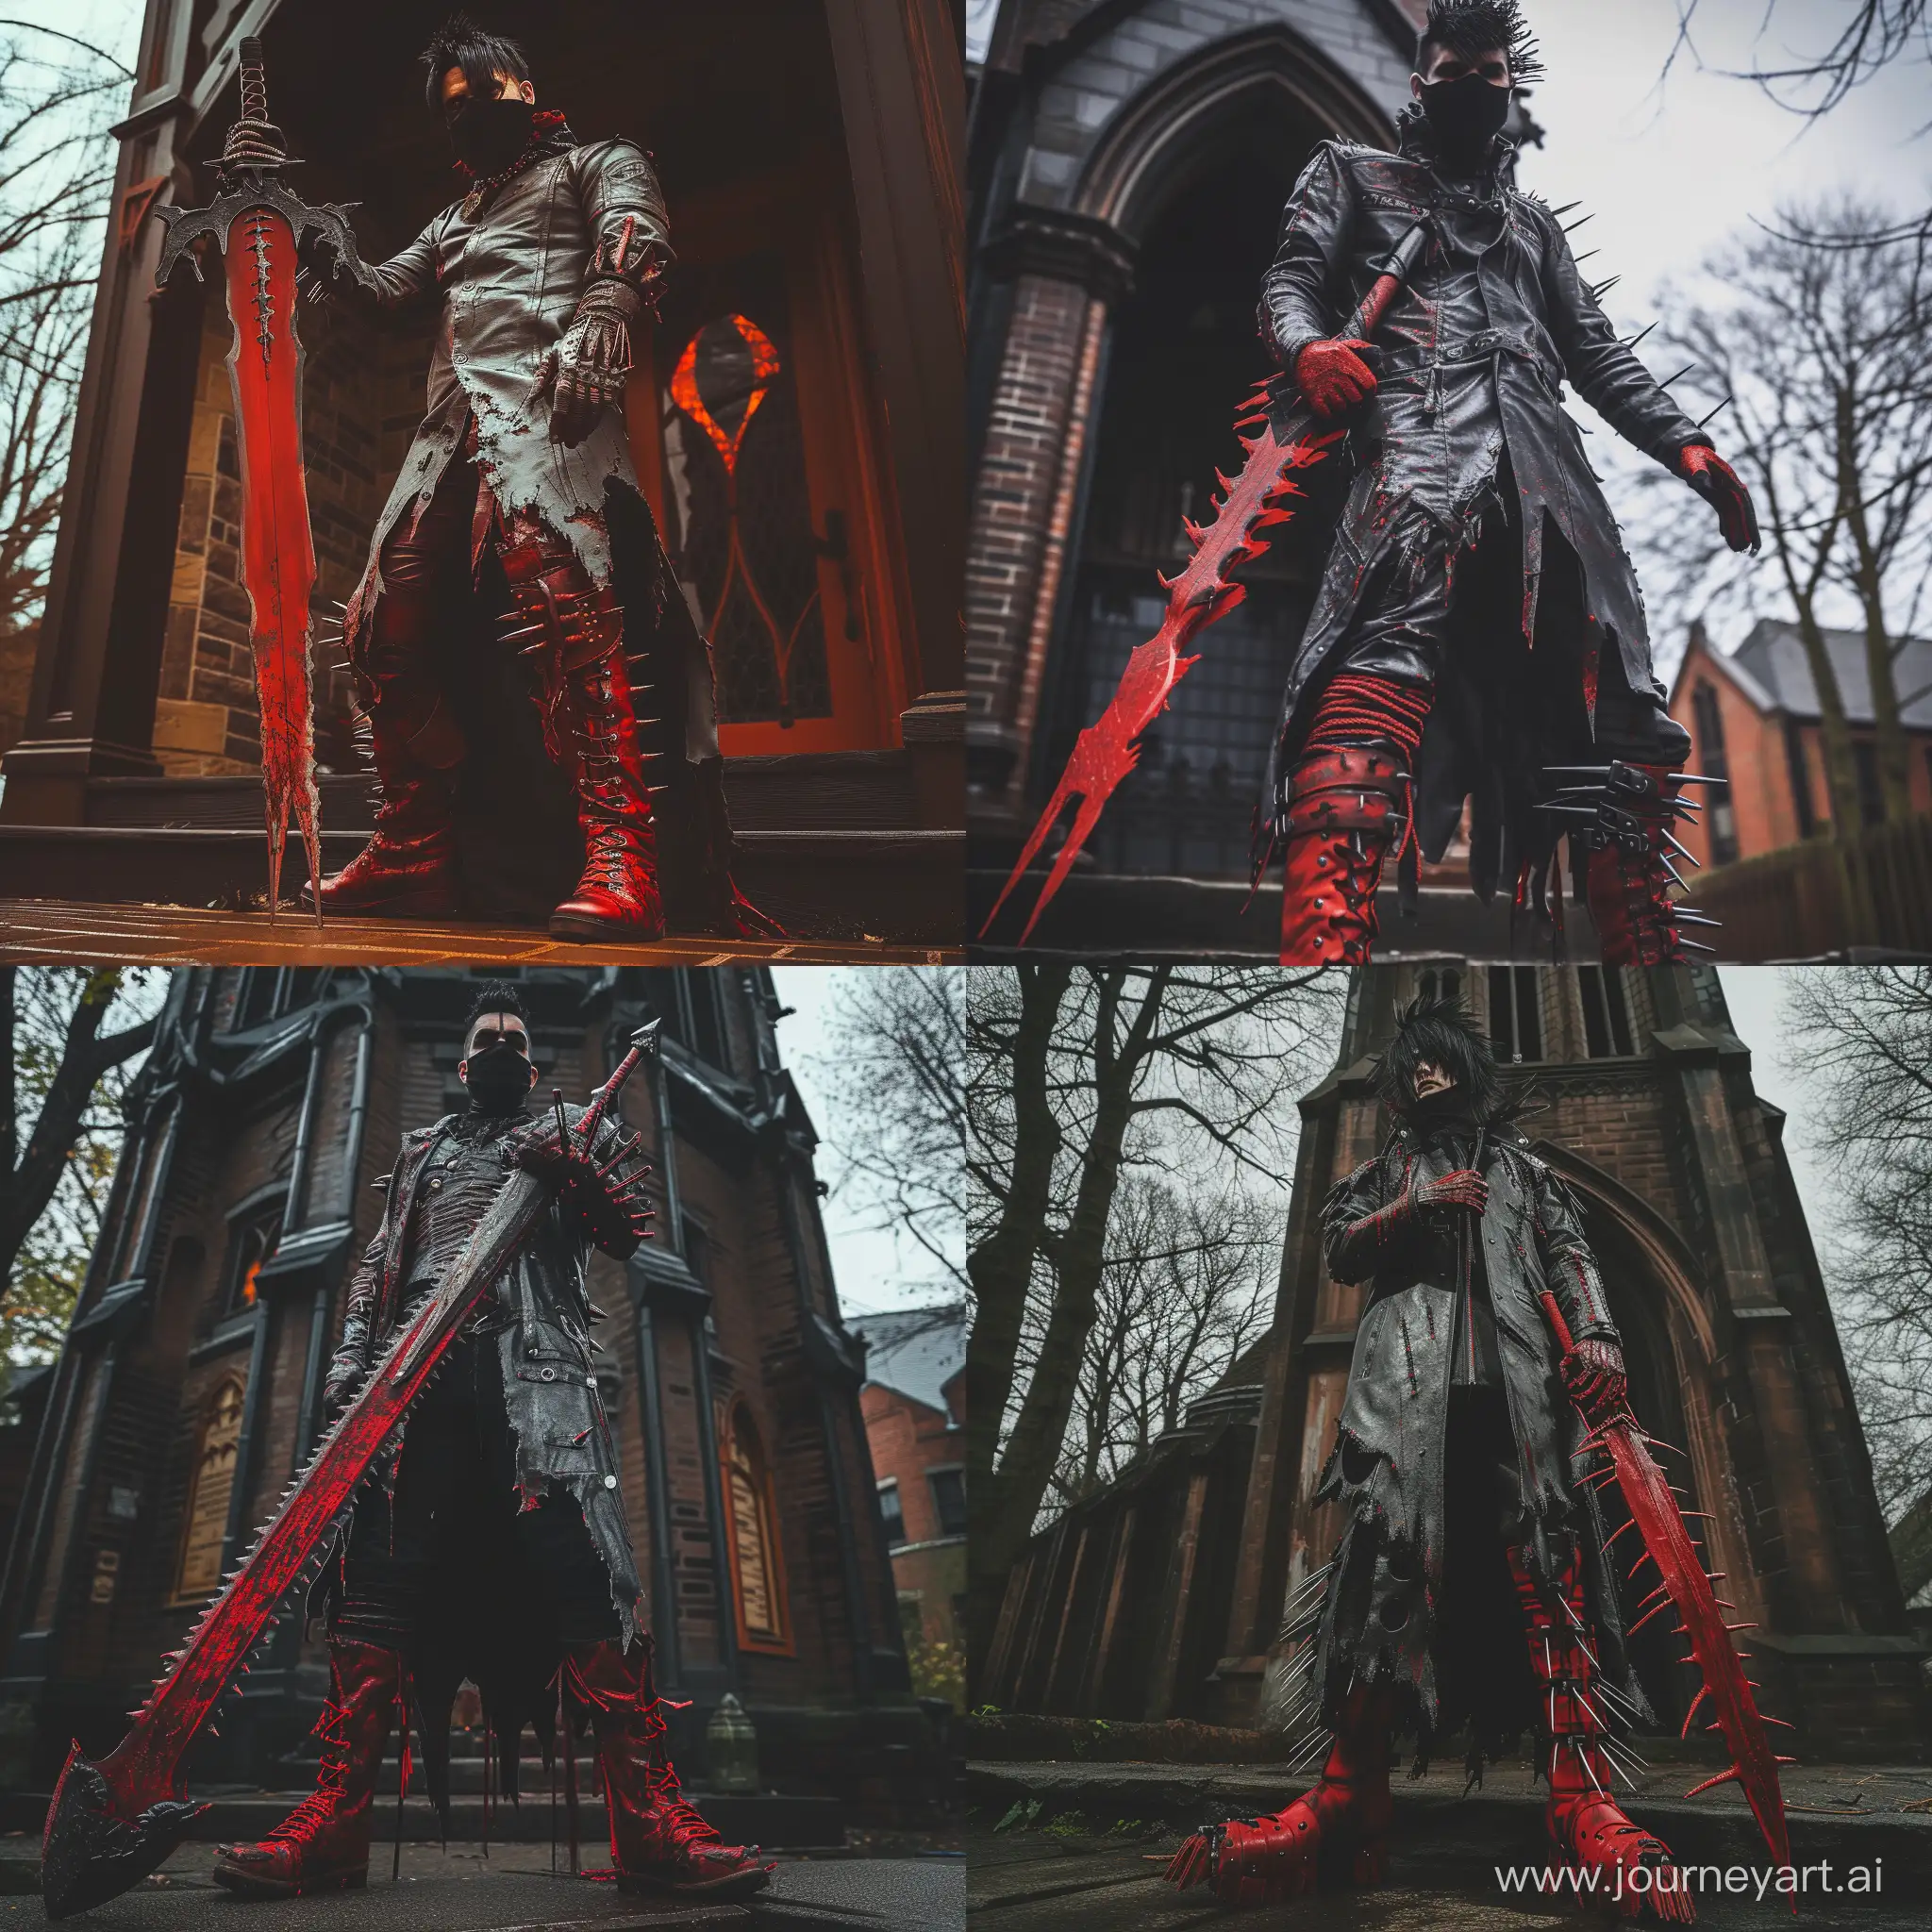 a man wearing, Blood-soaked leather coat with serrated edges, Fingerless gloves with venomous spikes, Fiery red boots equipped with retractable daggers, a black mask covering his mouth wielding a red blood colossal sword, standing outside of a gothic dark church,  bloodborne aesthetic, 1970's dark fantasy, detailed, cosmic horror, gritty, dark lighting, edgy